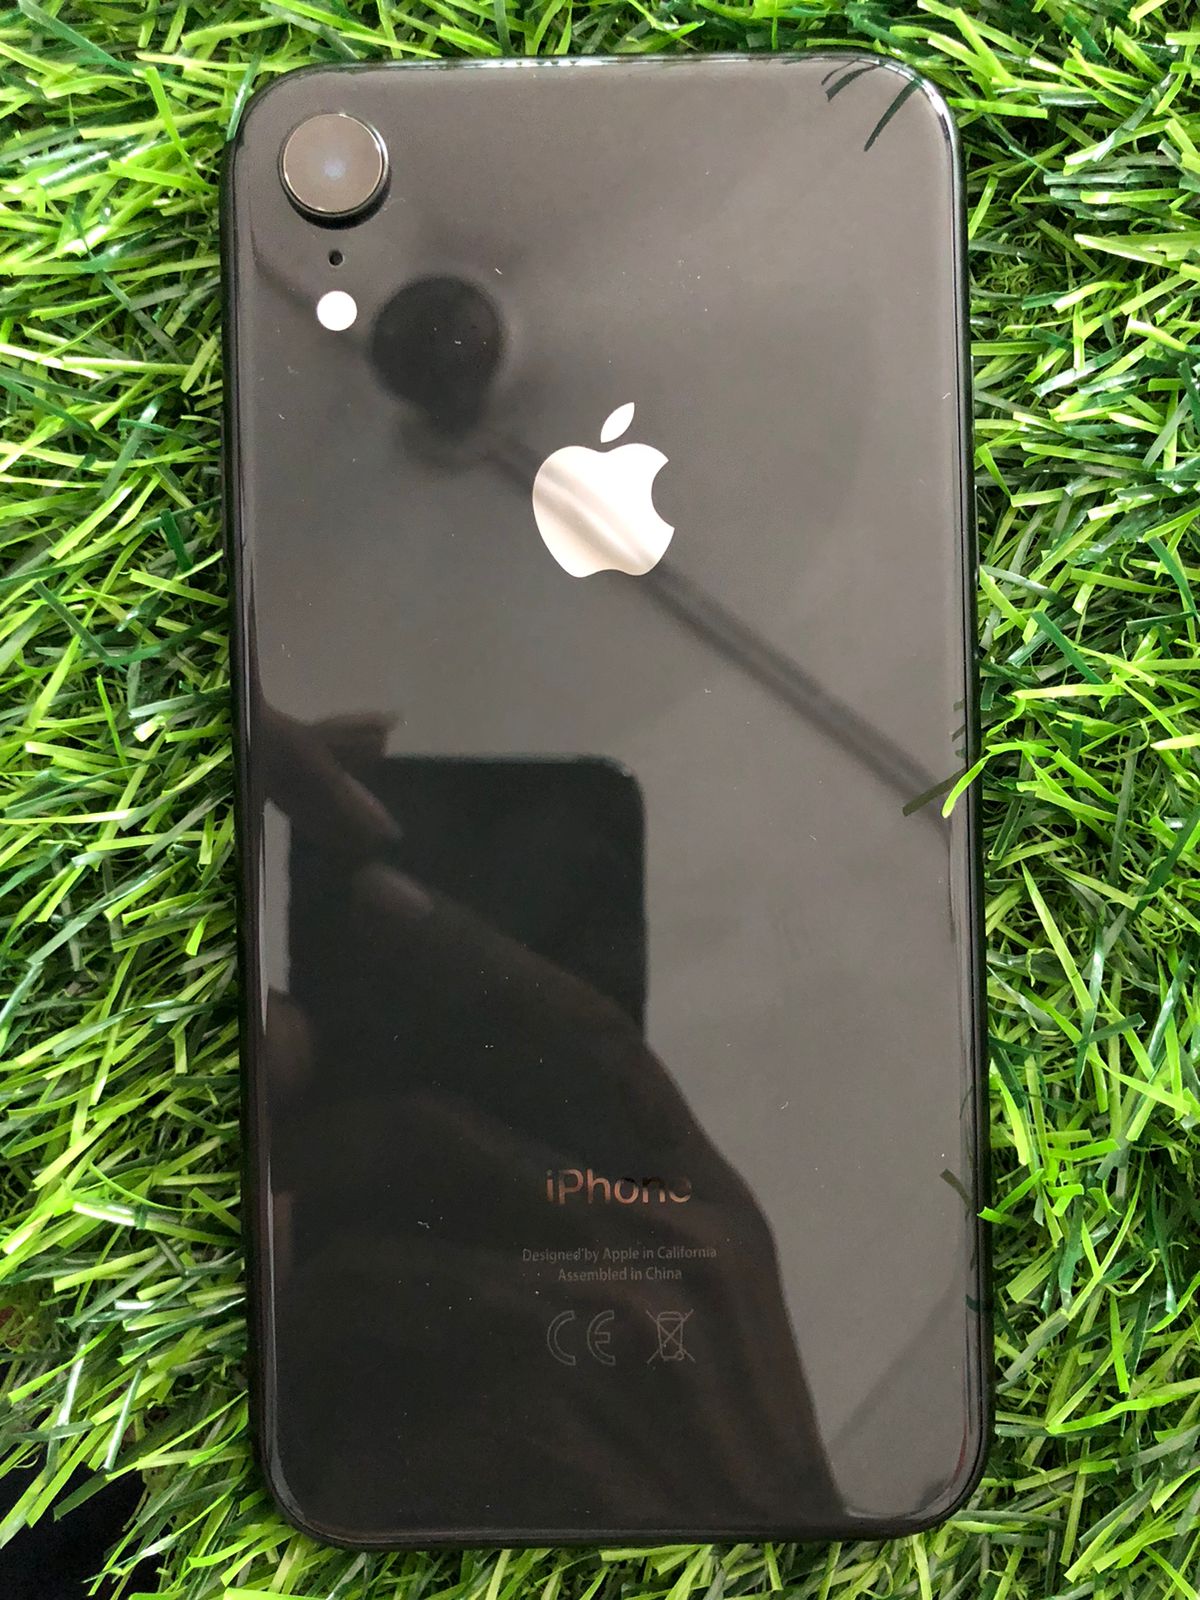 Details View - used xr price photos - used xr price in ahmedabad, used iphone price, iphone xr price ahmedabad, iphone xr 64gb black price in ahmedabad, buy apple iphone xr online, iphone xr black color features, apple iphone xr 64gb India, affordable iphone xr for sale, best deals on iphone xr, iphone xr installment options, apple warranty for iphone xr, iphone xr battery health percentage, contact details for iphone xr purchase, reseller bazzar
